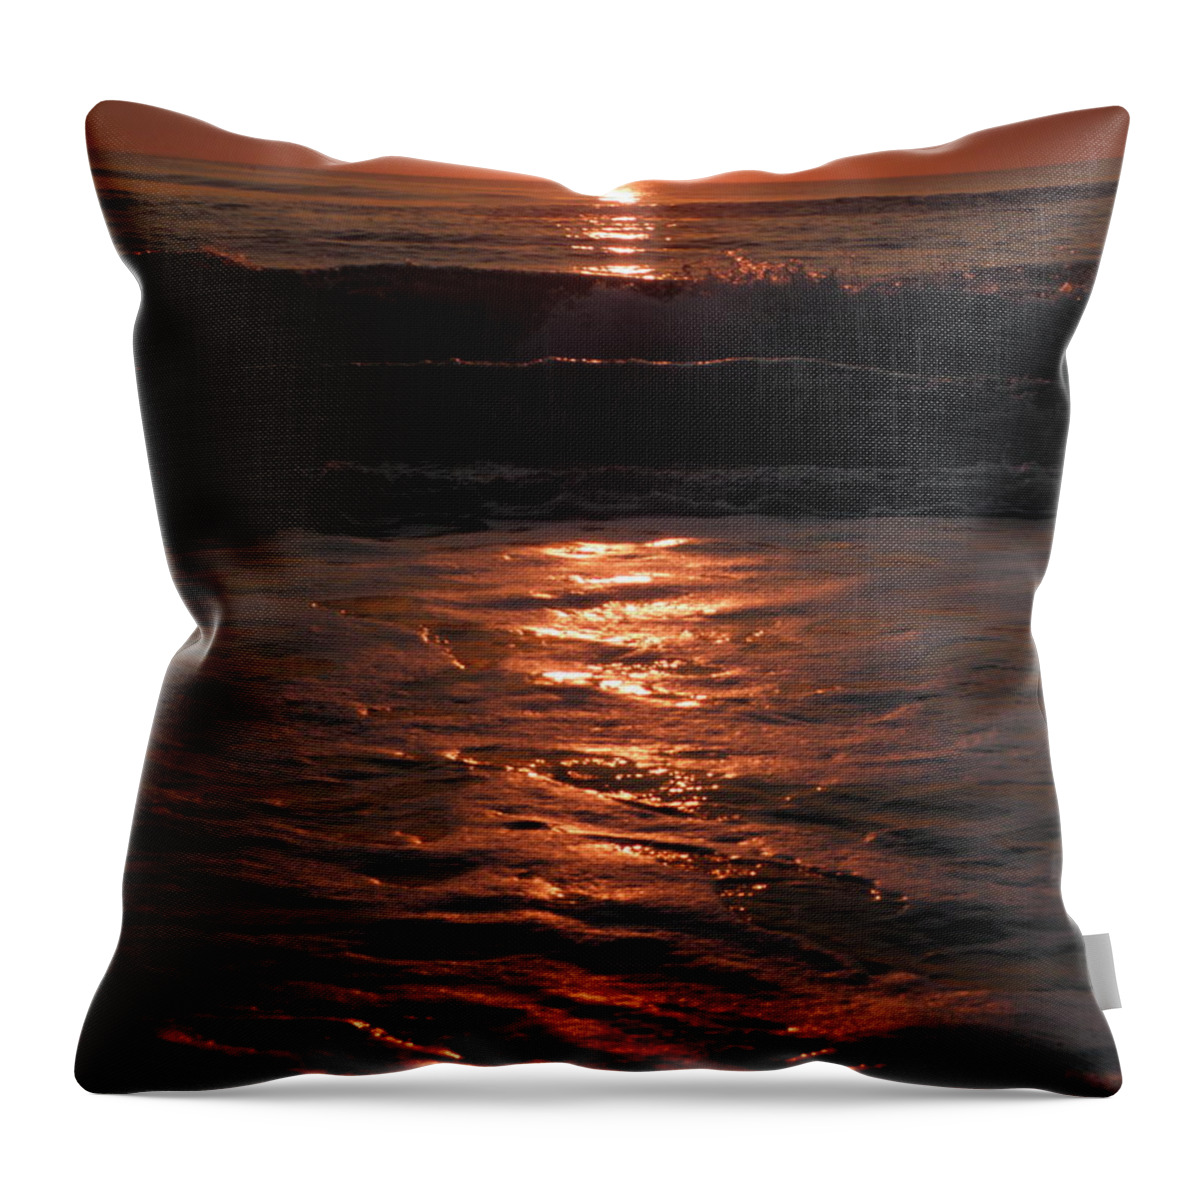 Sea Throw Pillow featuring the photograph Sea Foam And Wave Reflections by Kim Galluzzo Wozniak